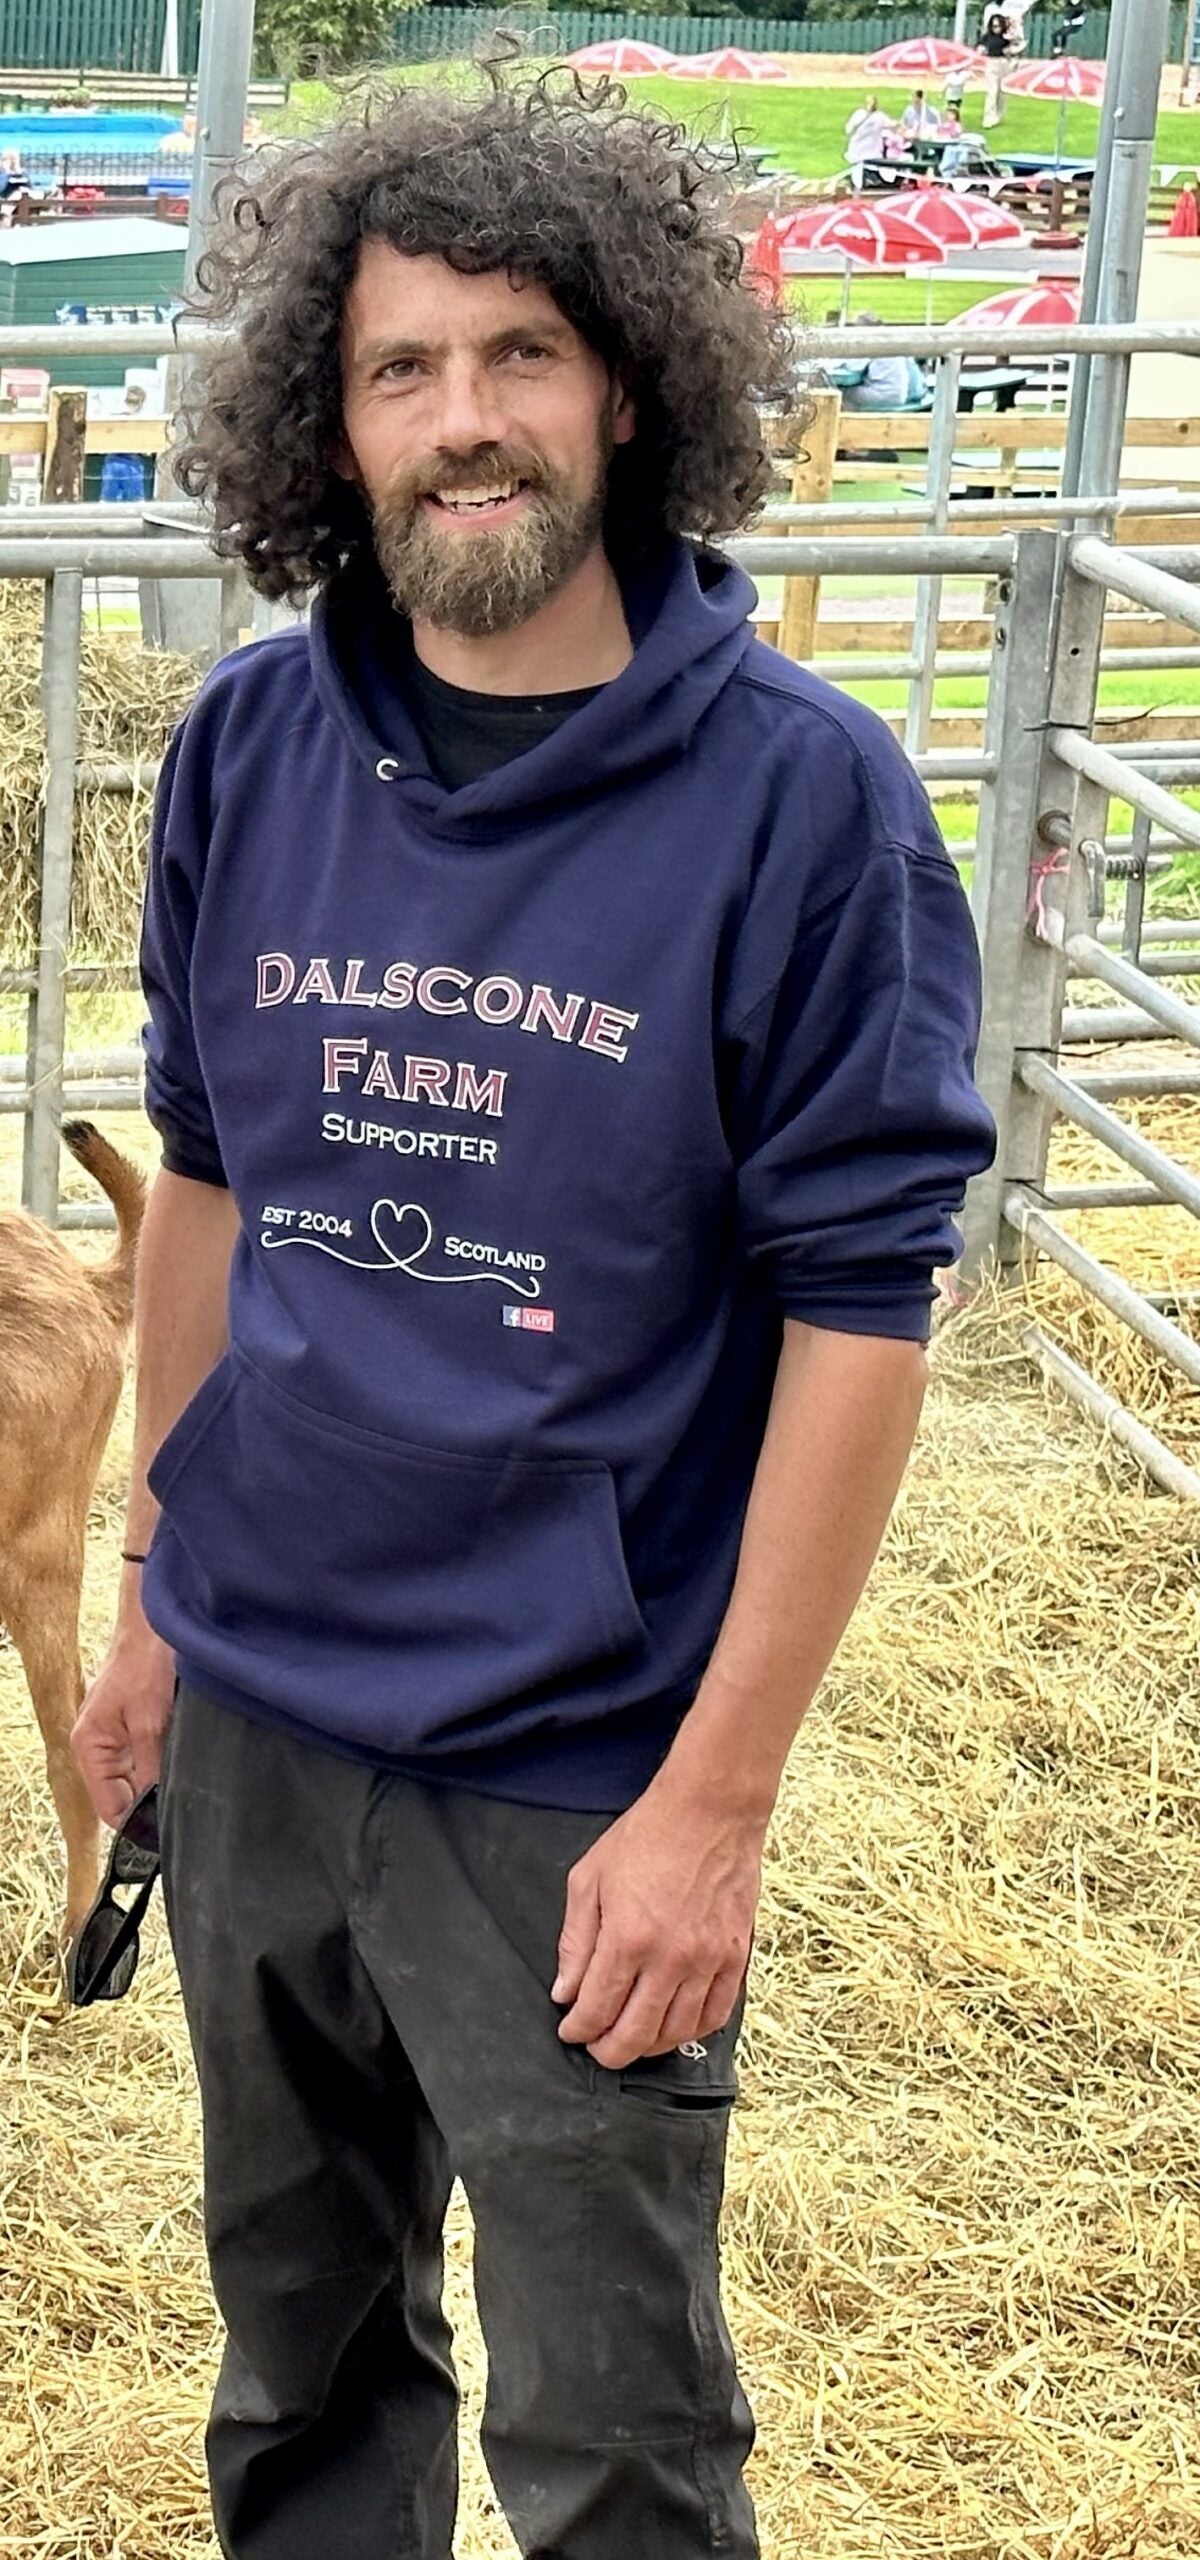 Dalscone Supporters Uni style - Hoodie